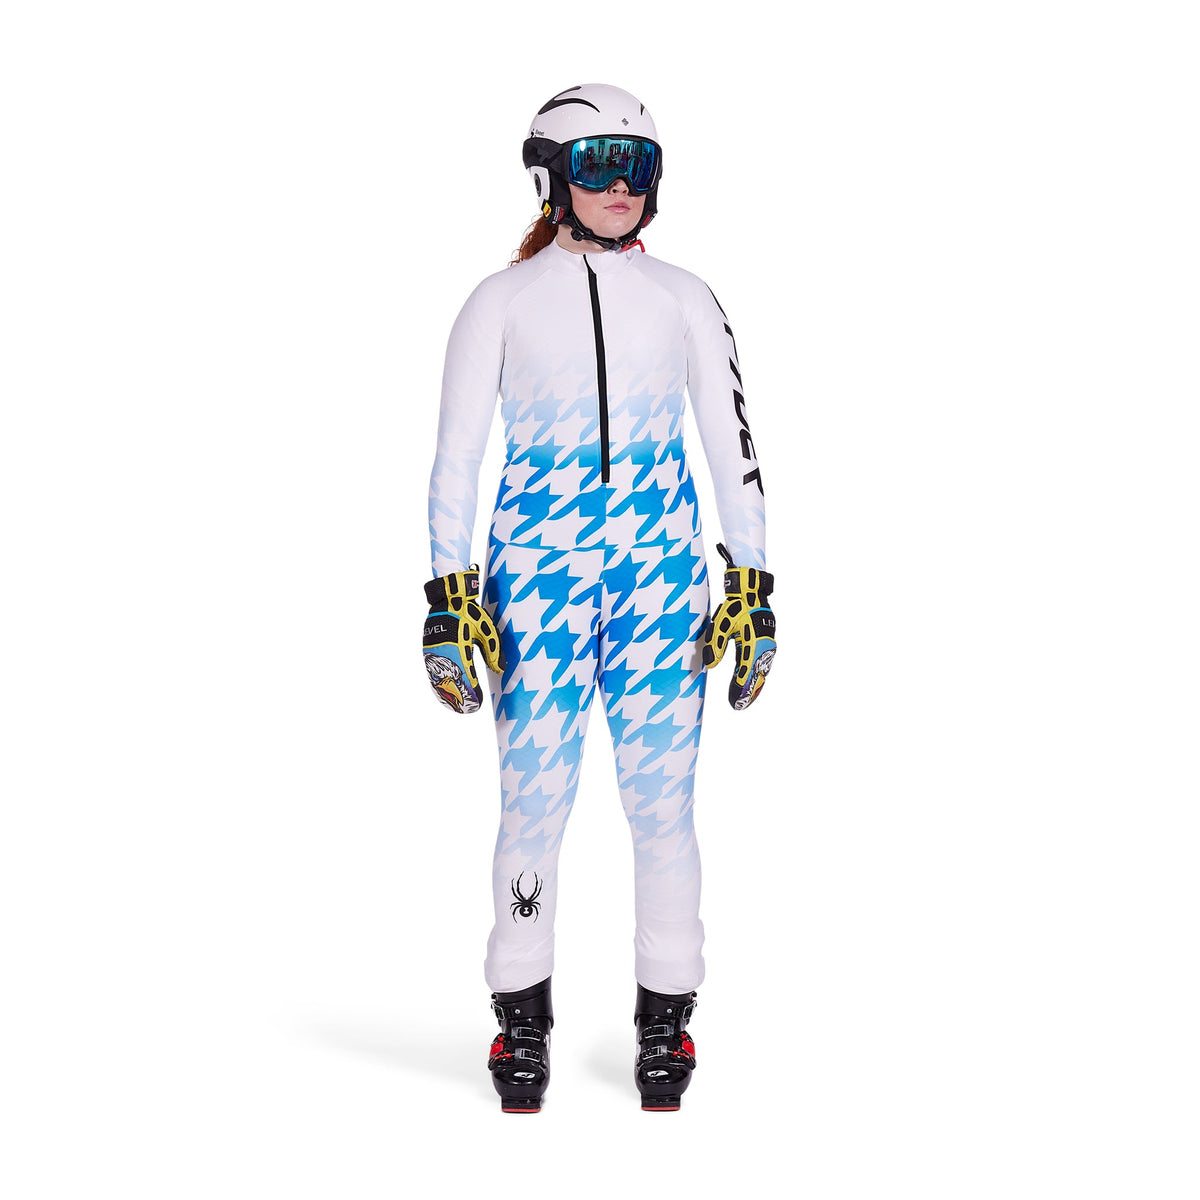 Spyder World Cup Dh Ski Racing Suit Blue